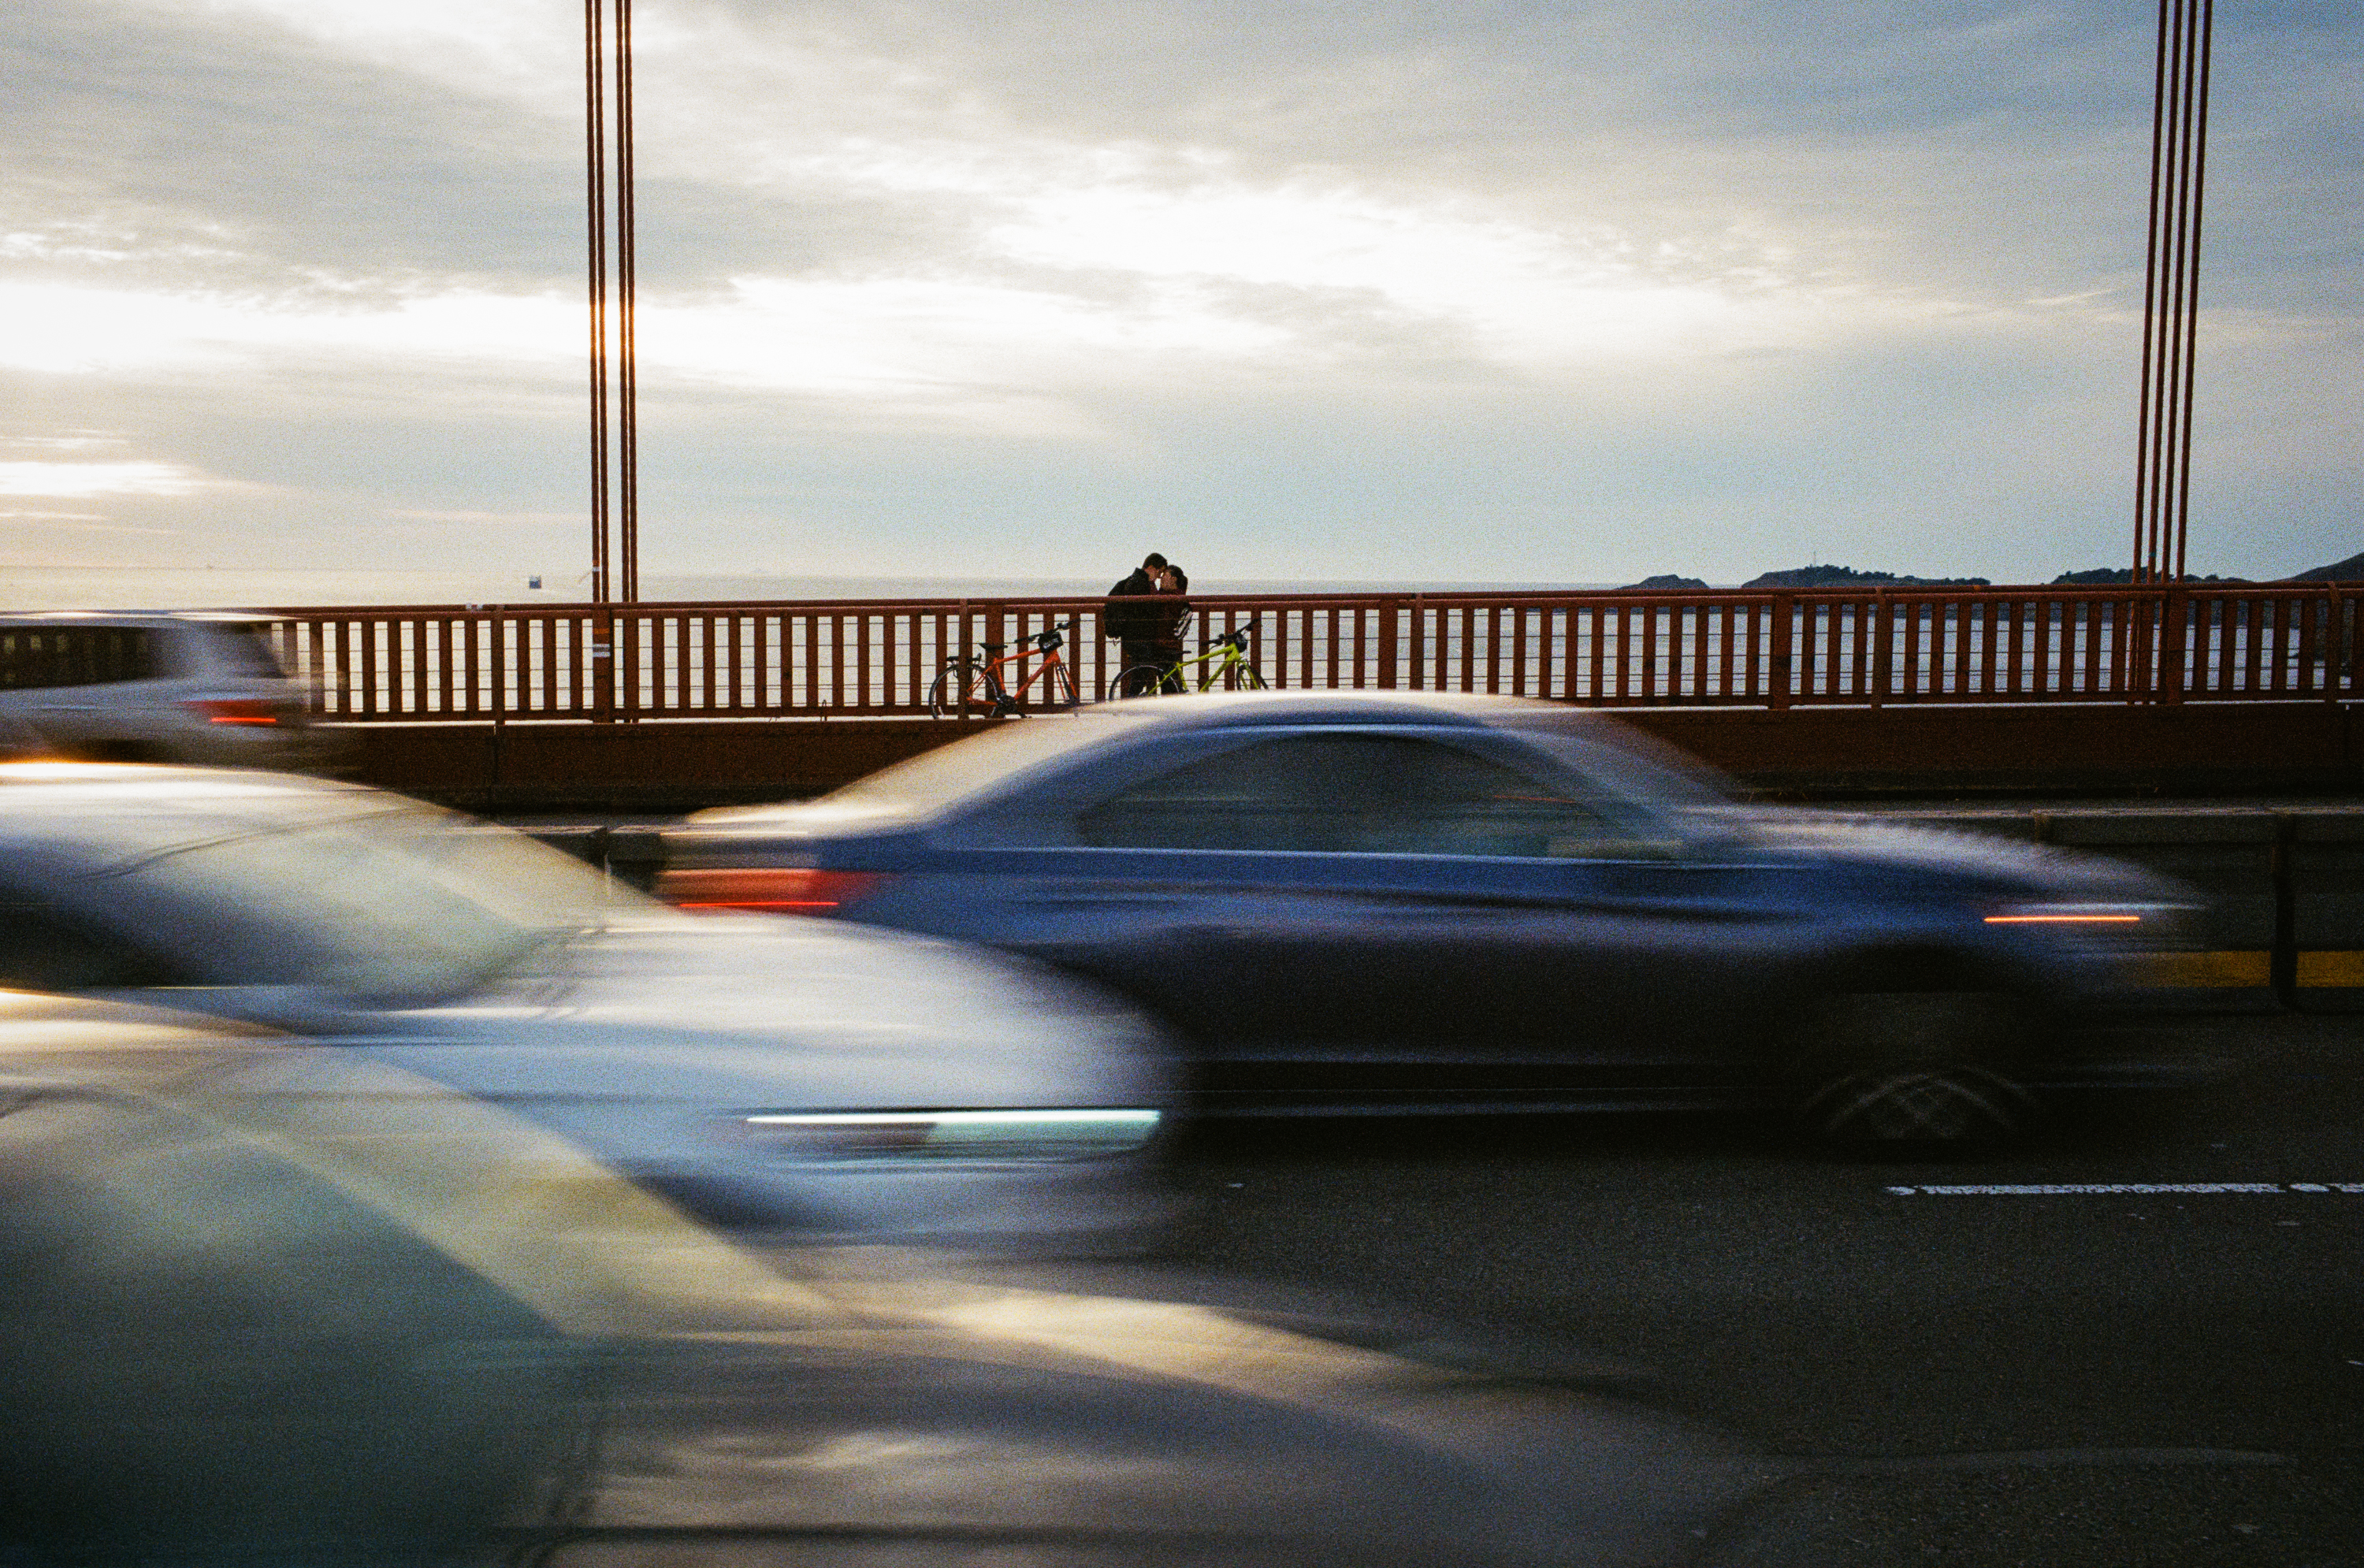 Two people across the hug on the Golden Gate Bridge as cars pass by in November 2020.